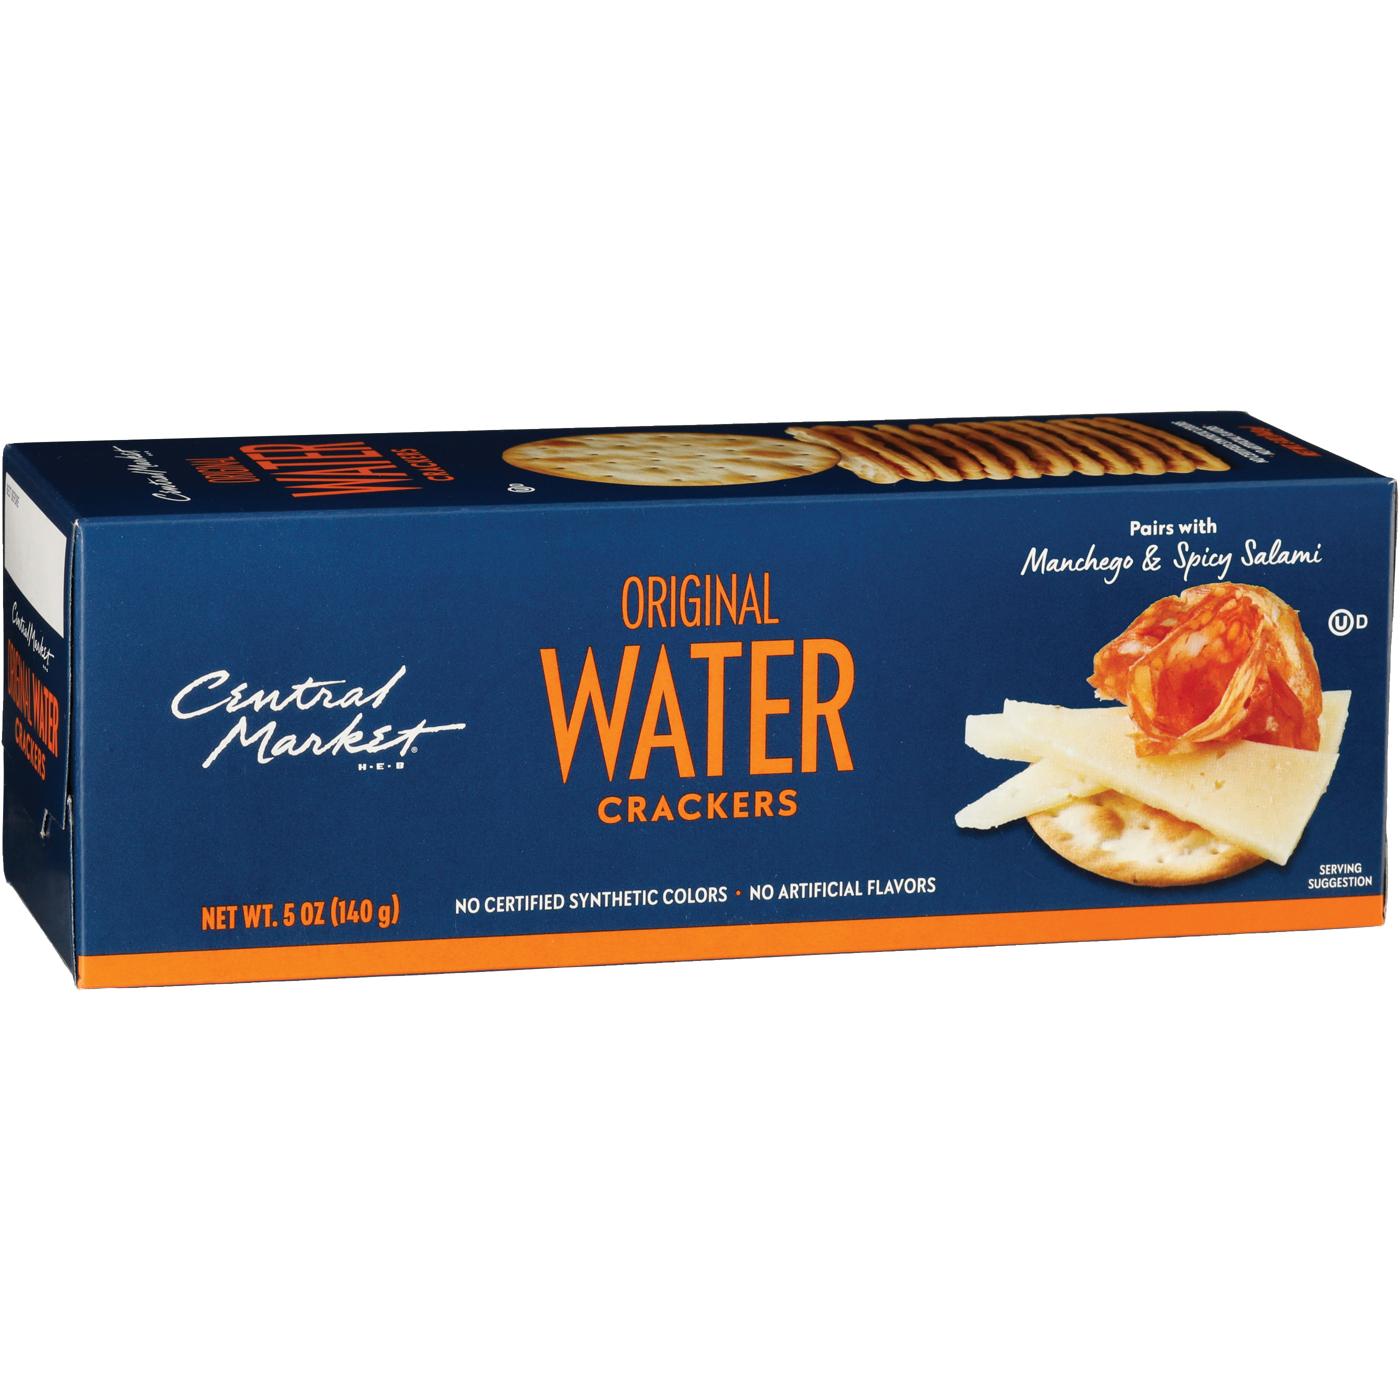 Central Market Original Water Crackers; image 2 of 2